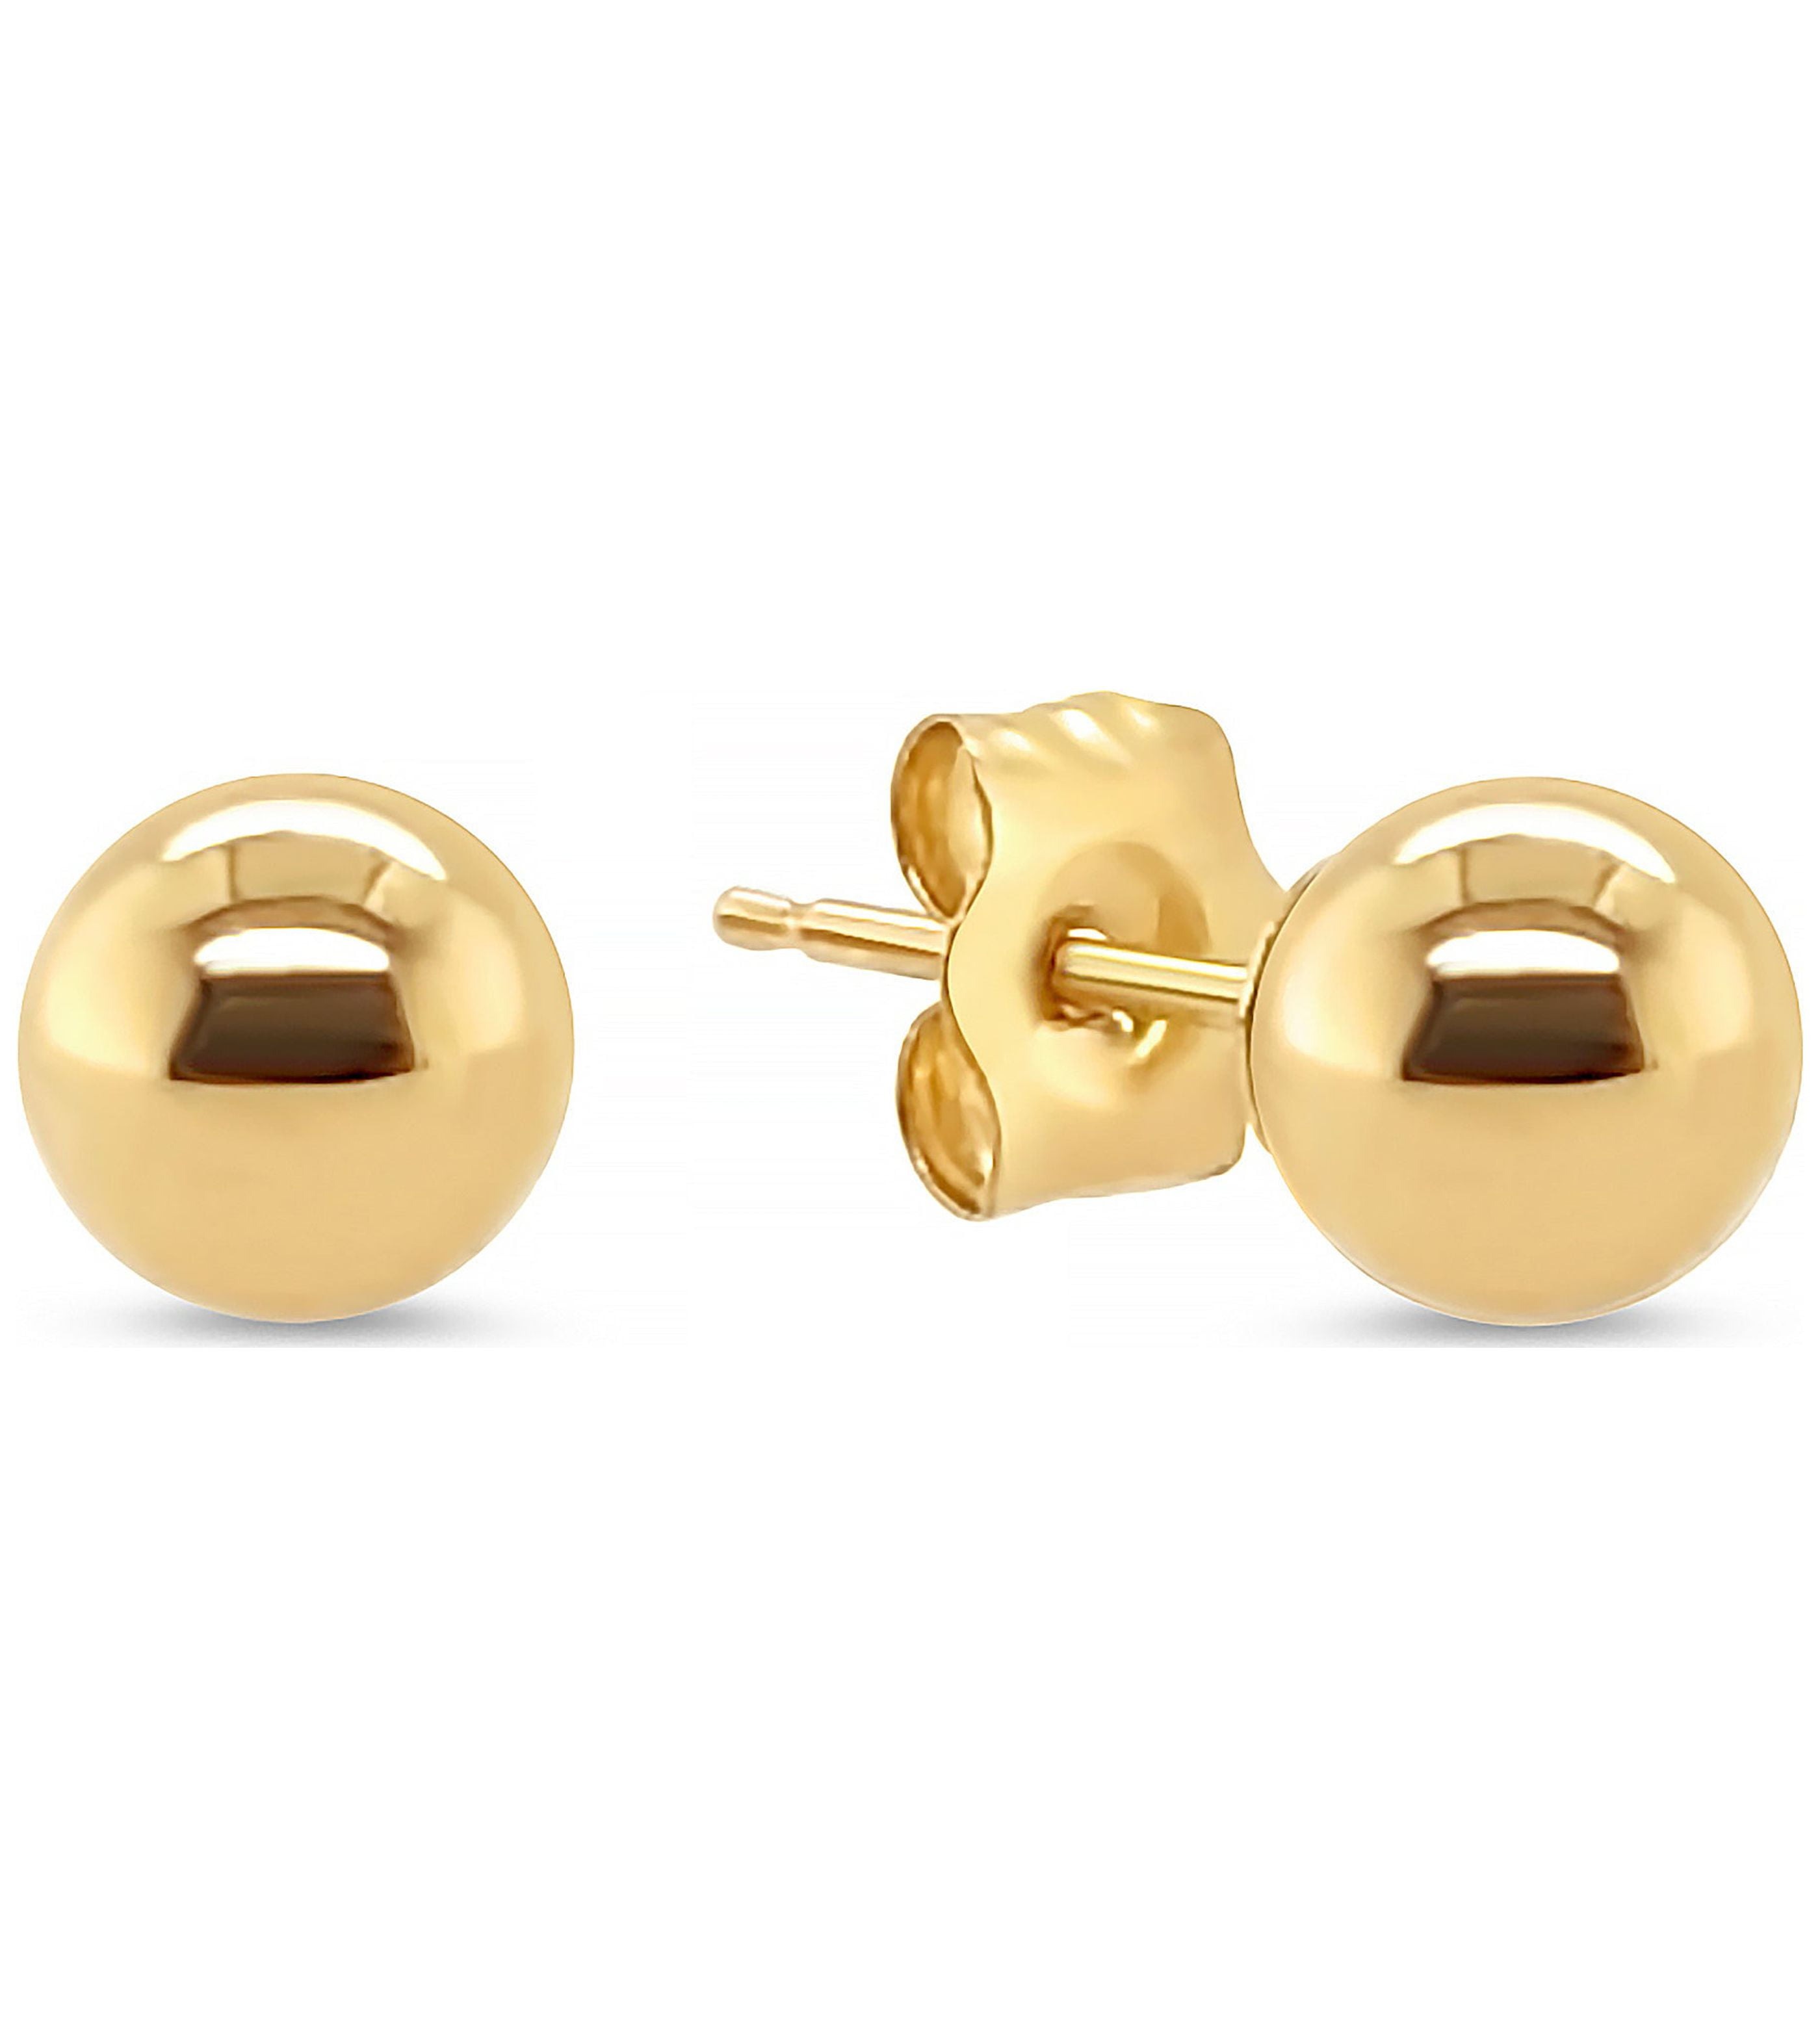 Flipkart.com - Buy BLING JEWELRY Hollow Kids Round Ball Stud earrings 14K  Gold 3mm Lac Stud Earring Online at Best Prices in India